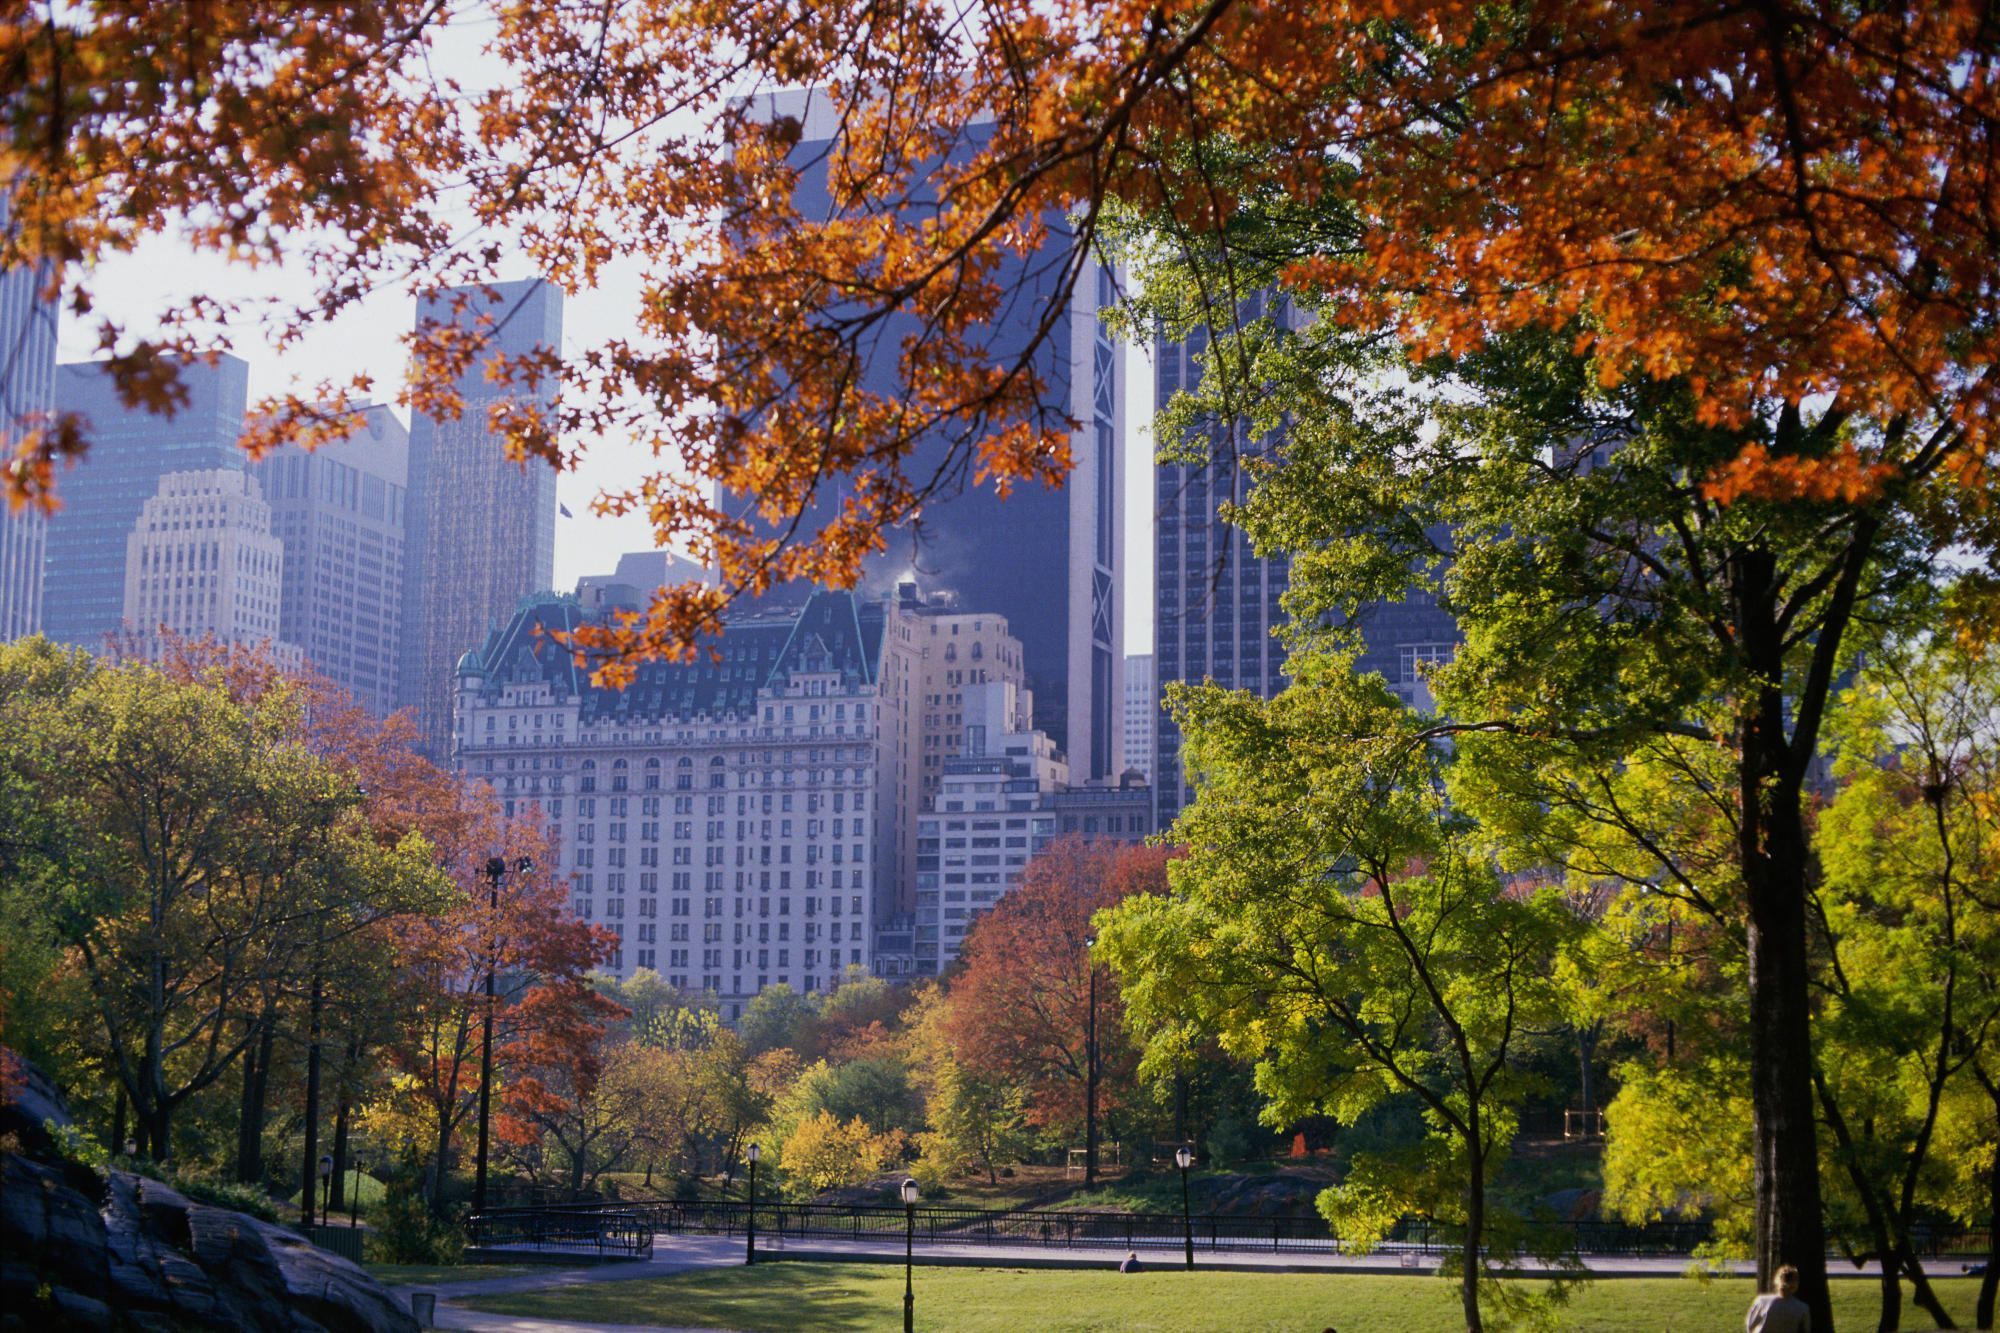 Cityscape #HD. New york wallpaper, Autumn in new york, Central park